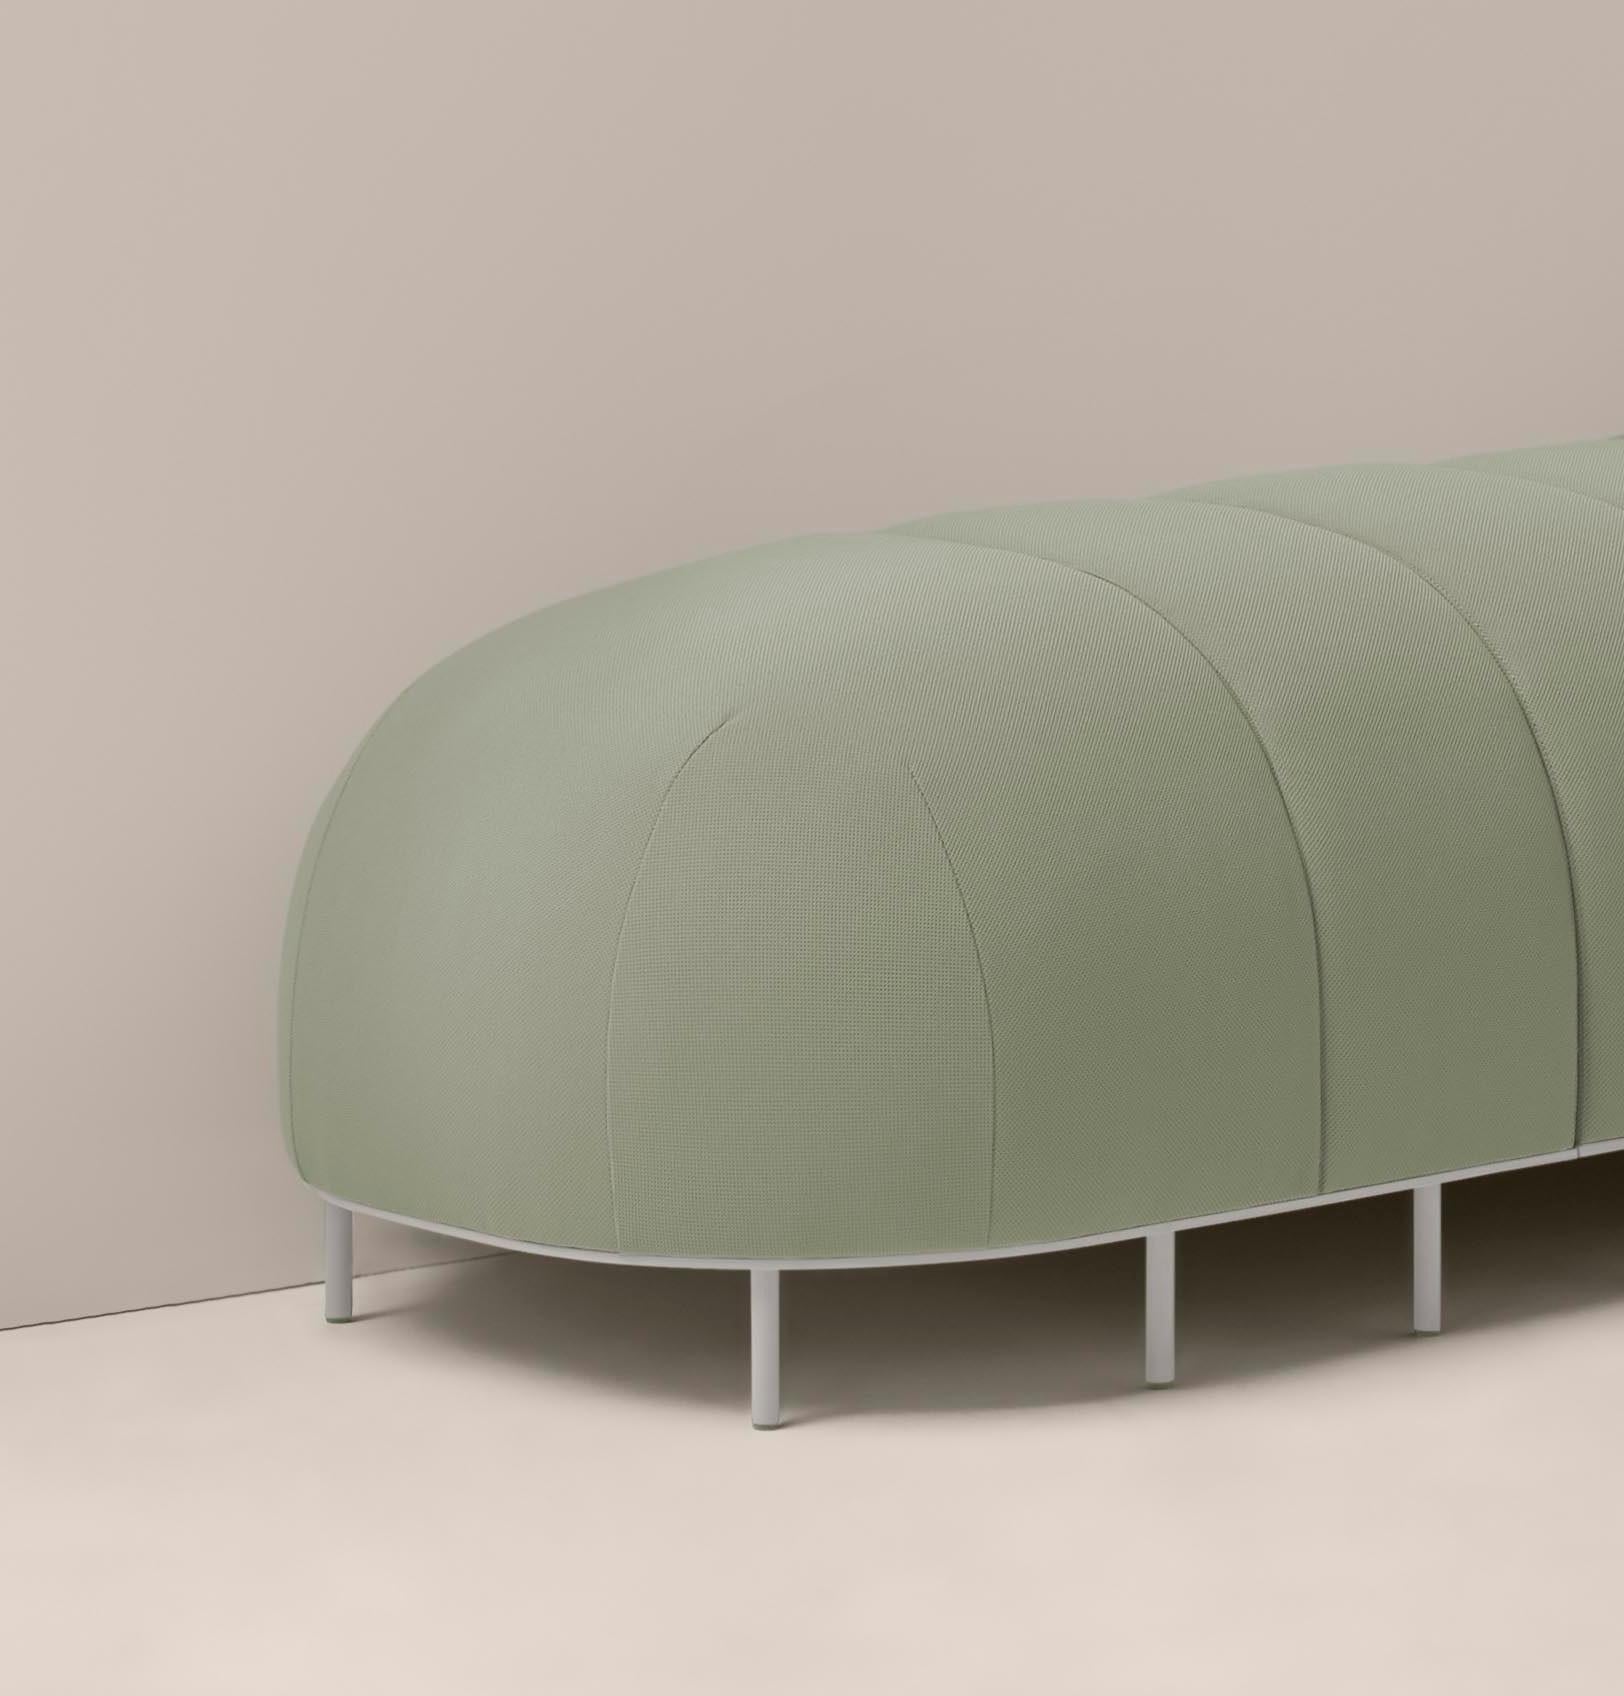 End Module Worm Bench by Pepe Albargues
Dimensions: D 65 x W 65 x H 50 cm
Materials: Plywood, foam CMHR, iron
Available in different colors. Straight and curved modules available

Worm is an amusing bench that can evolve and change according to the